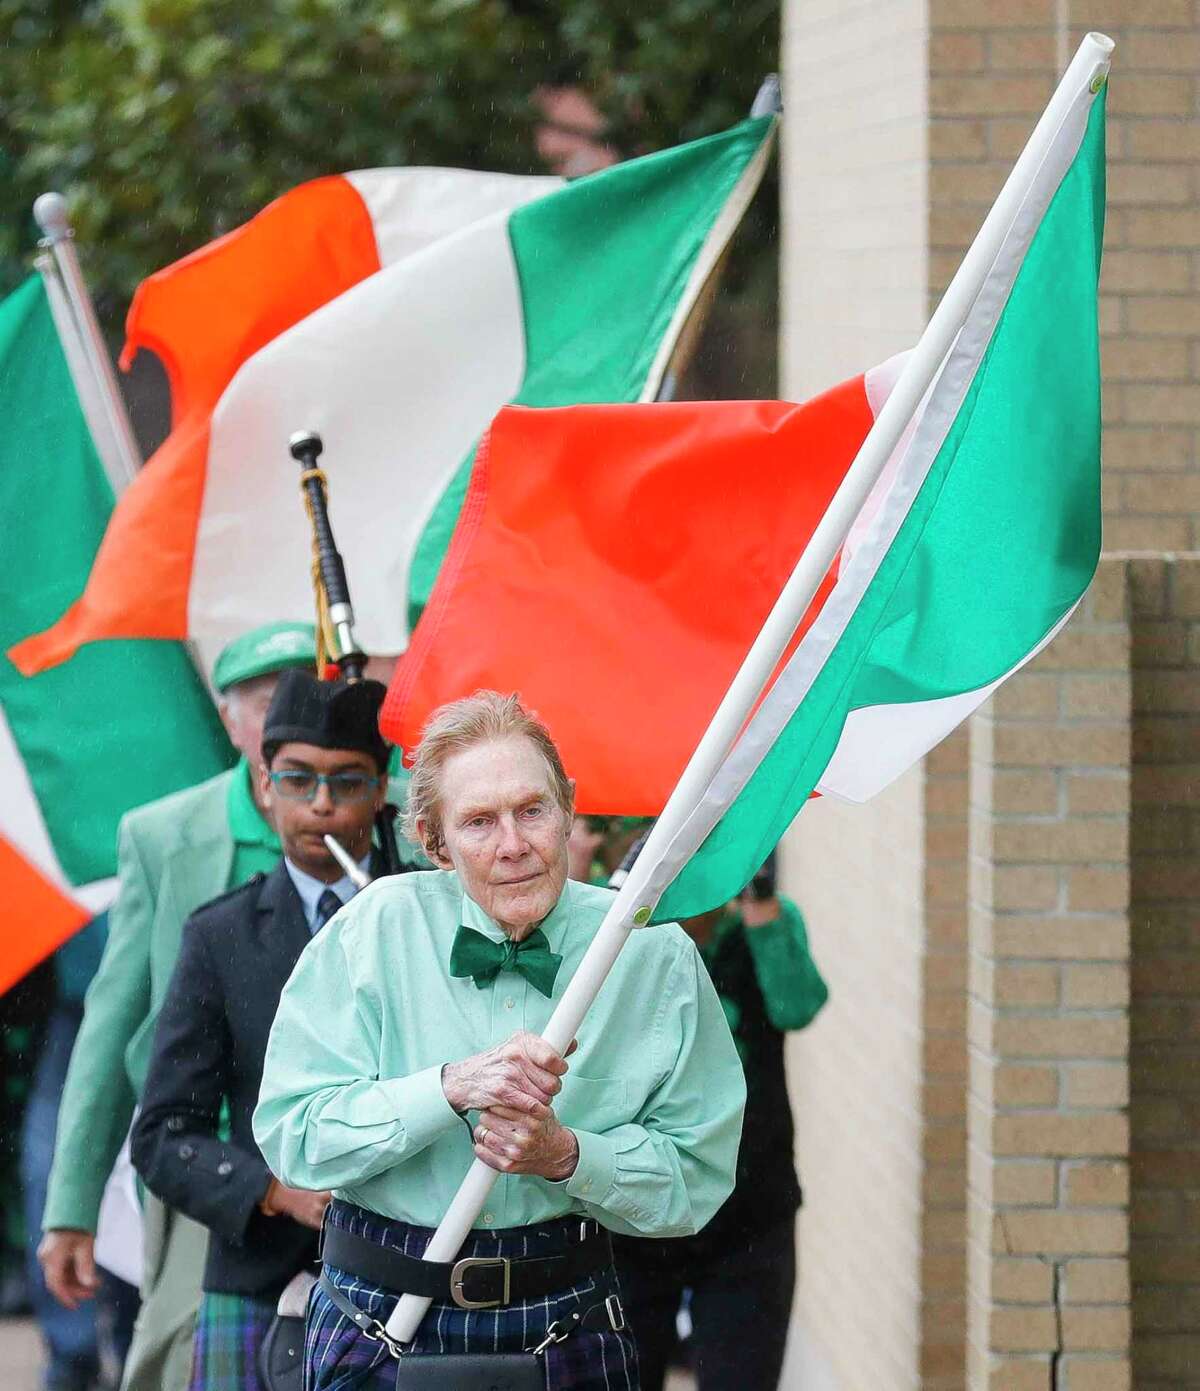 Michael McDougal carries an Irish flag as he leads the annual St. Patrick’s Day walking parade through downtown Conroe, Thursday, March 17, 2022, in Conroe. This year's event is set for March 17 at 4 p.m. at The Corner Pub. 